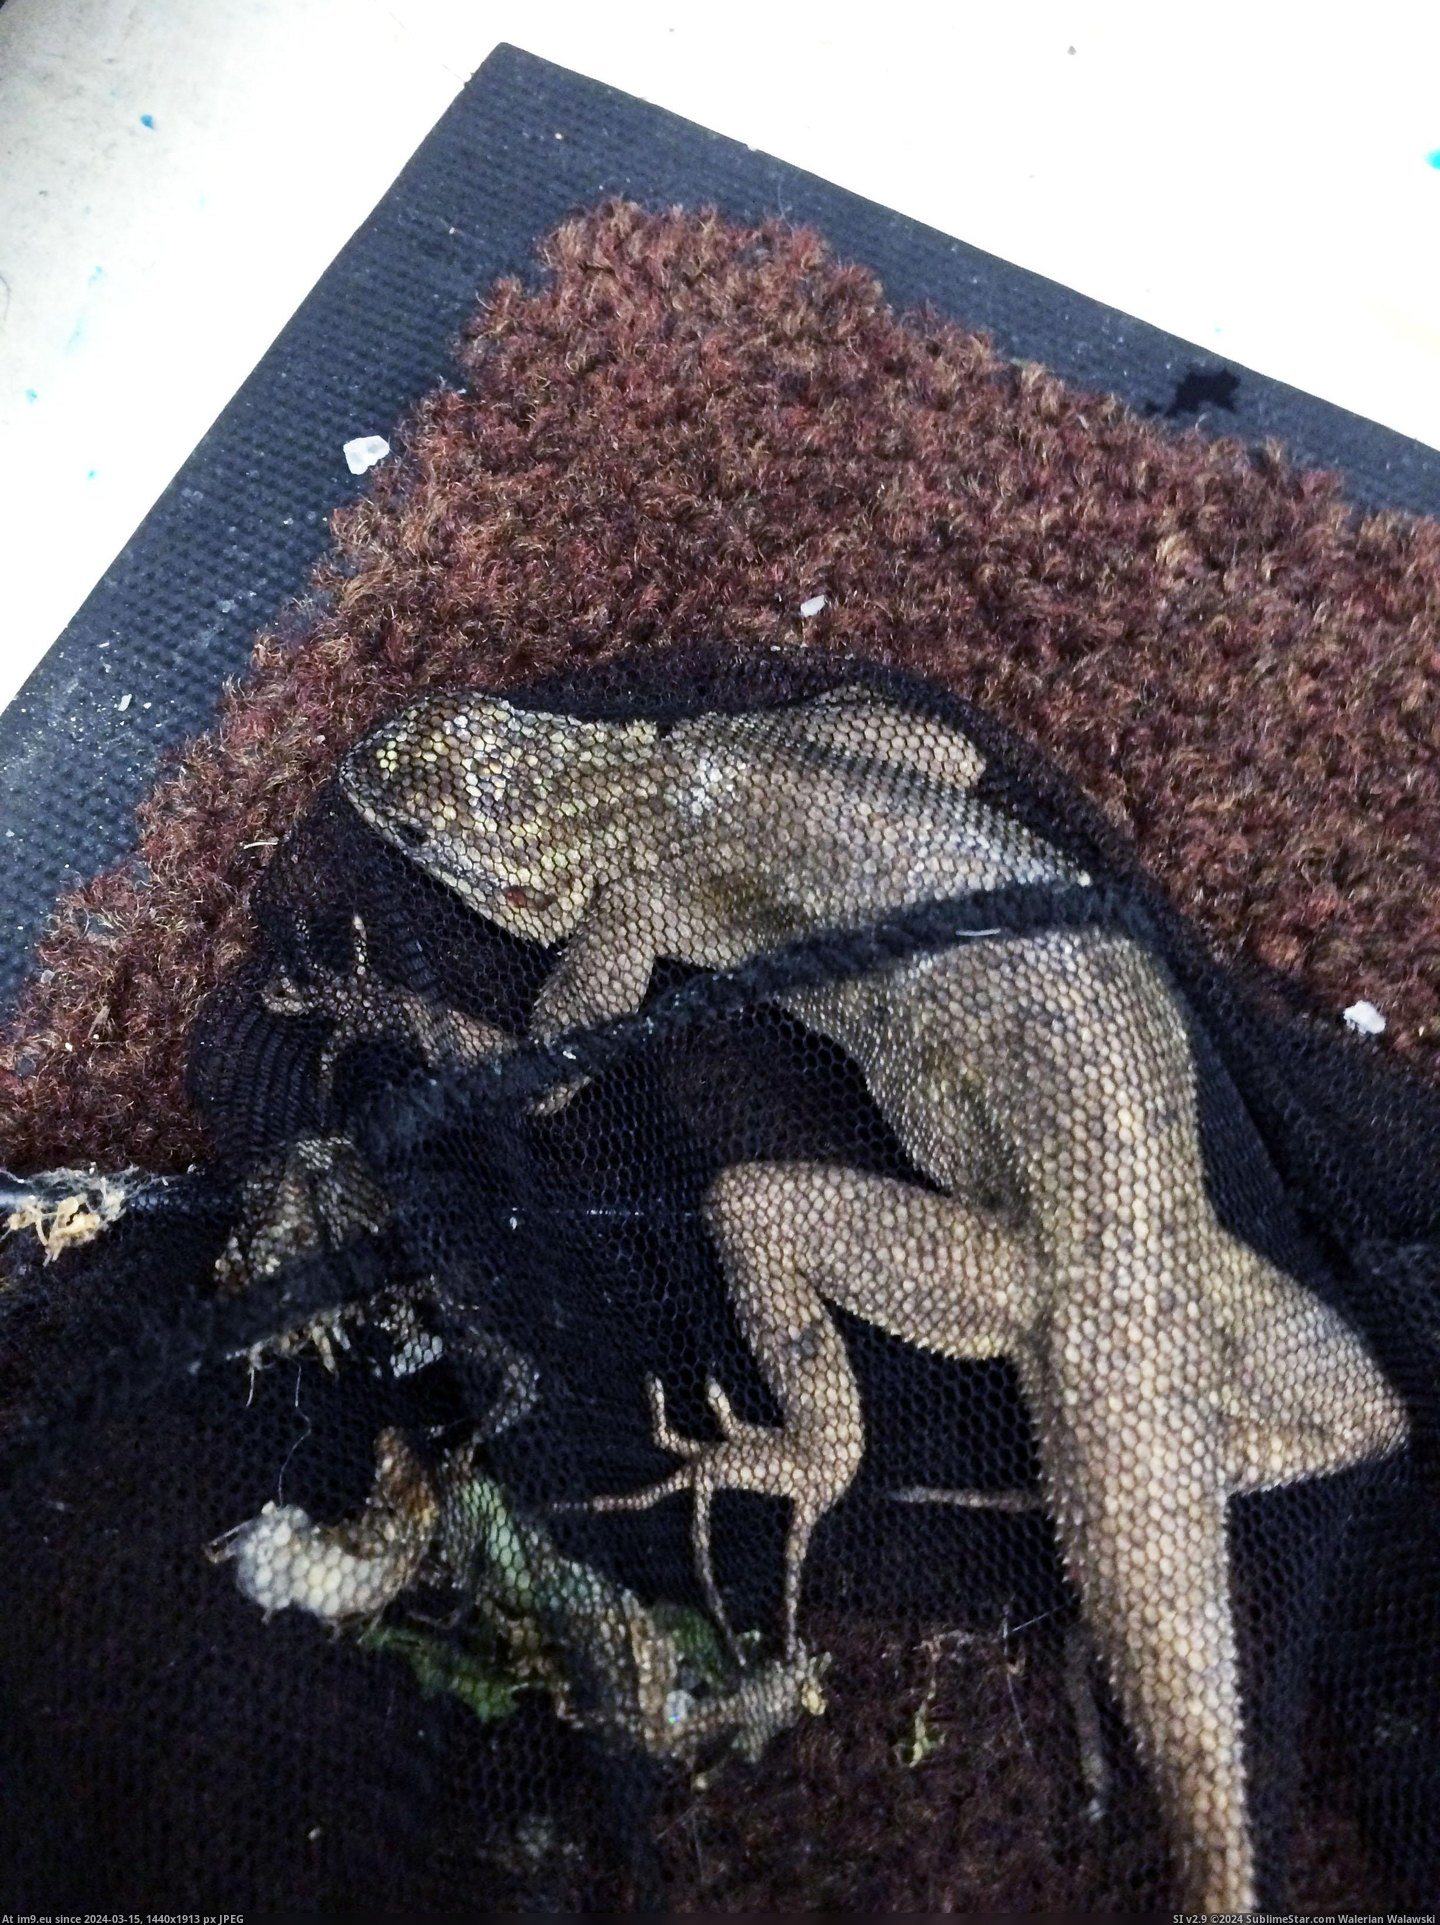 [Pics] For the past year, no one has ever believed me that there was a lizard loose in the pet shop I work at. They named him Bi (in My r/PICS favs)